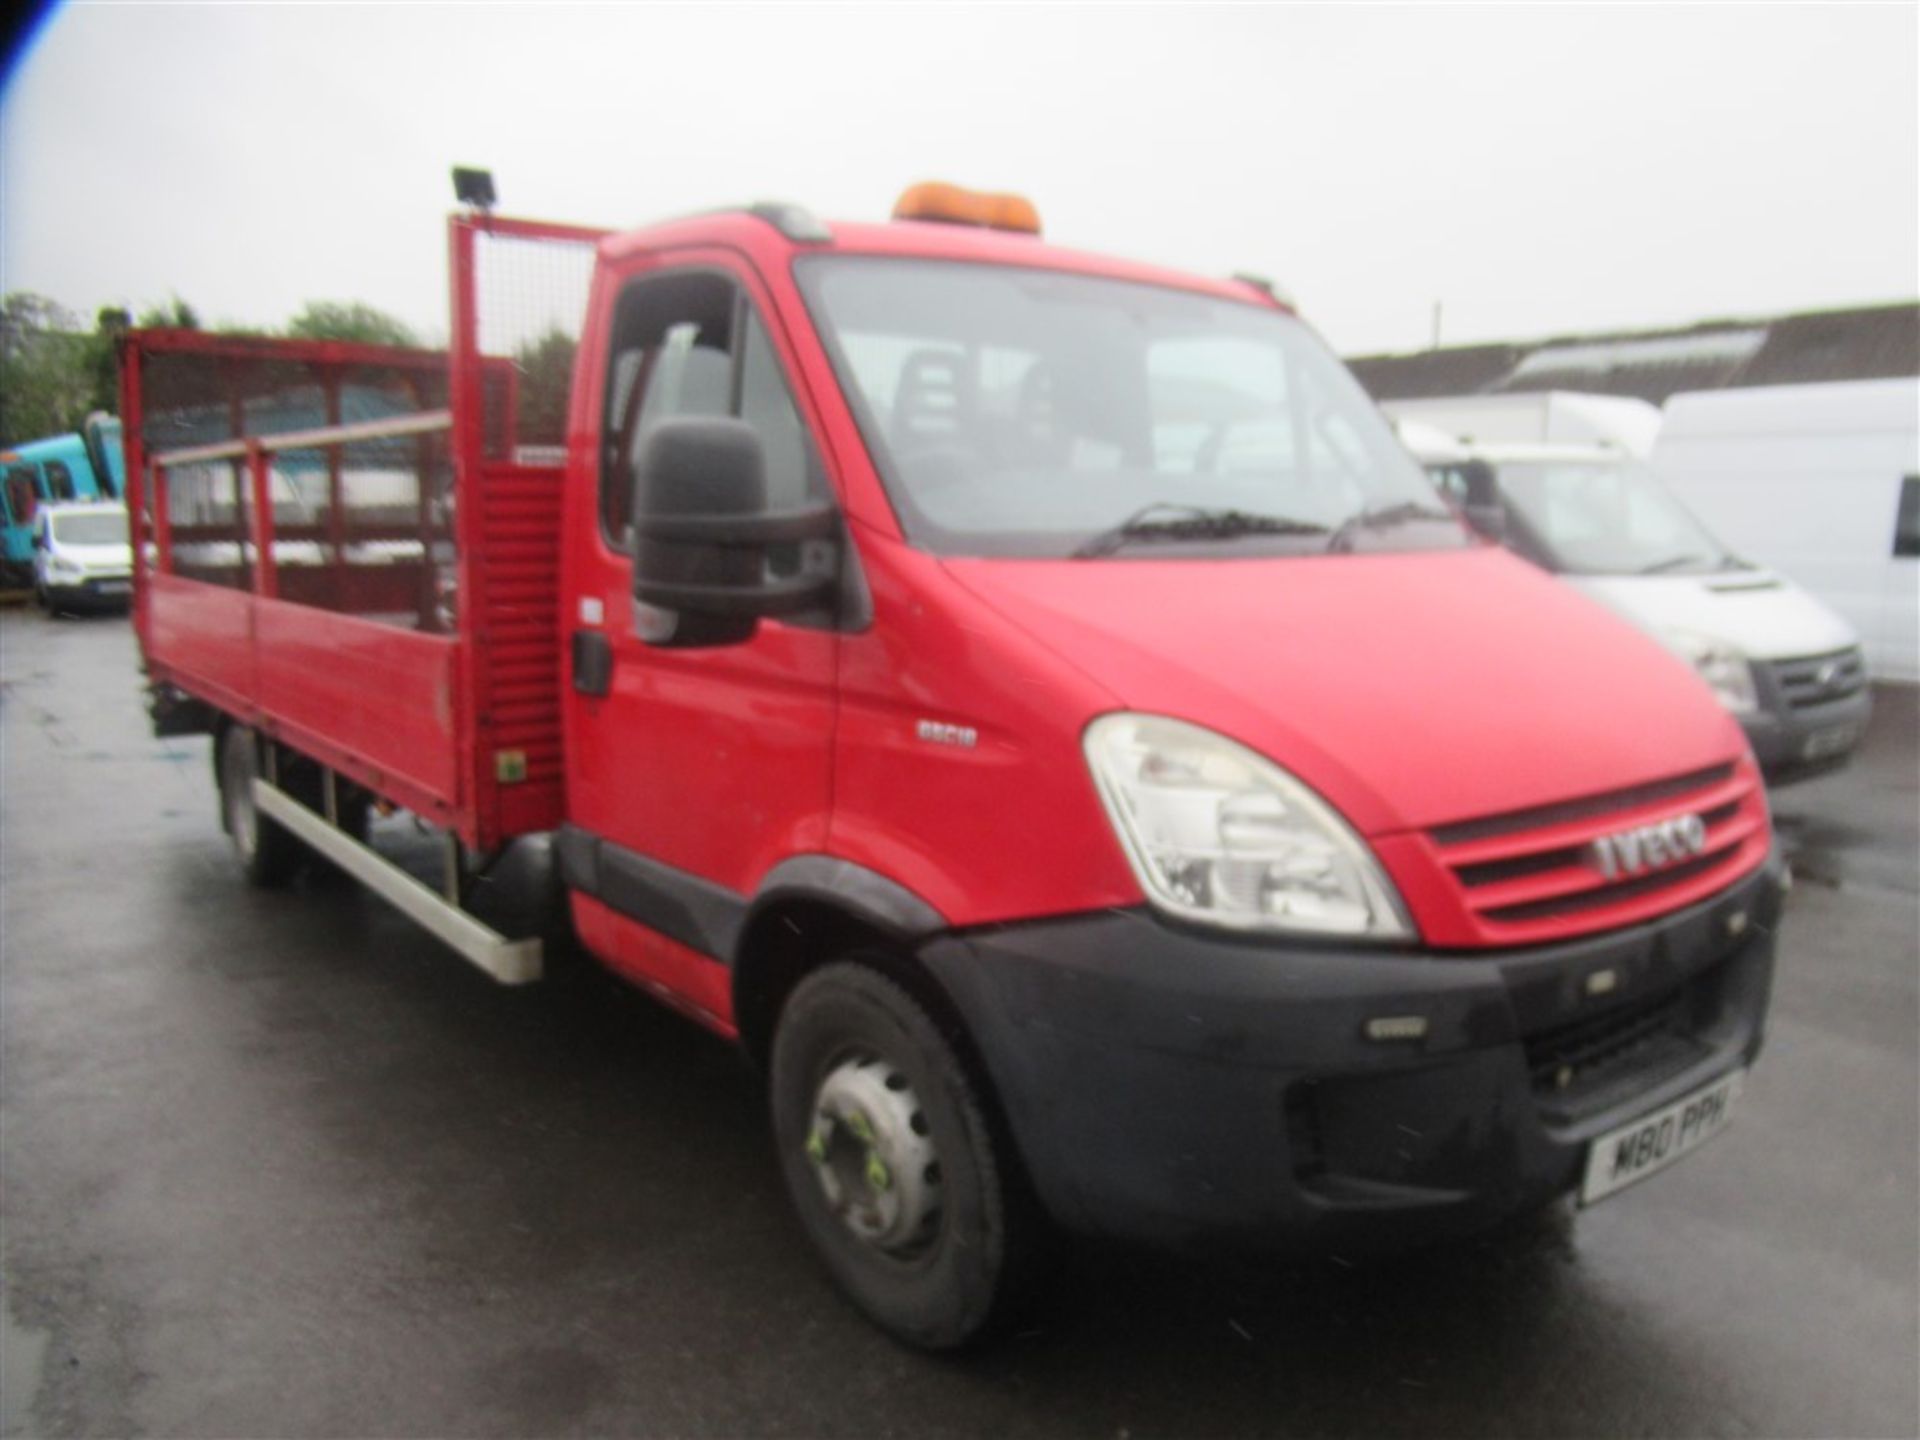 2009 IVECO DAILY 65C18 DROPSIDE, 1ST REG 05/09, TEST 10/19, 275723KM, V5 HERE, 3 FORMER KEEPERS [+